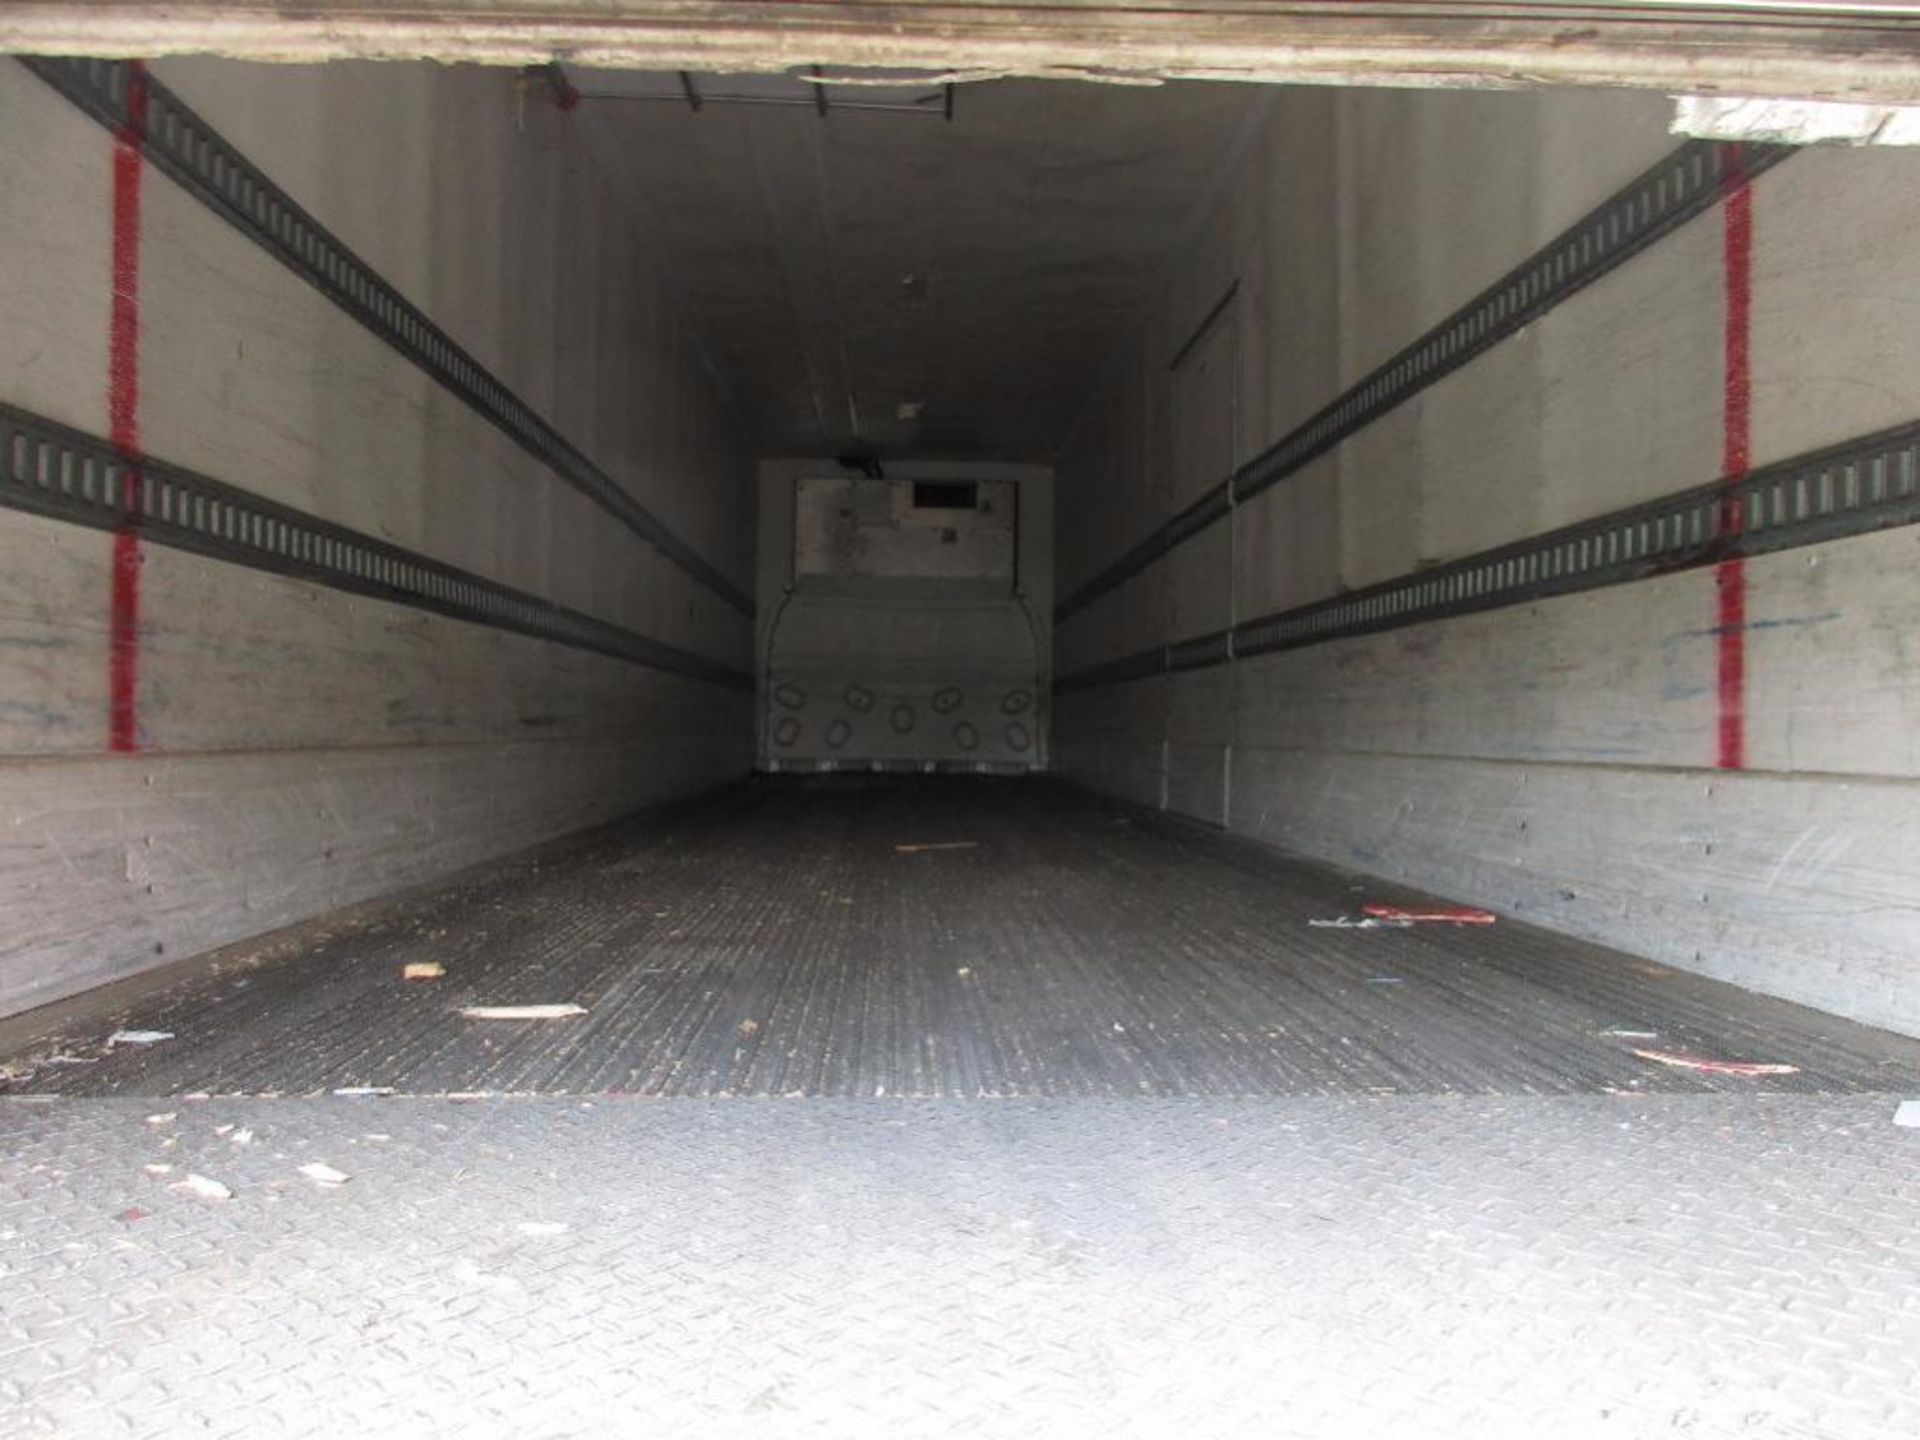 2004 Great Dane 35' Refrigerated Trailer, VIN # 1GRAA70275B703706, Unit 83502 - Image 12 of 28